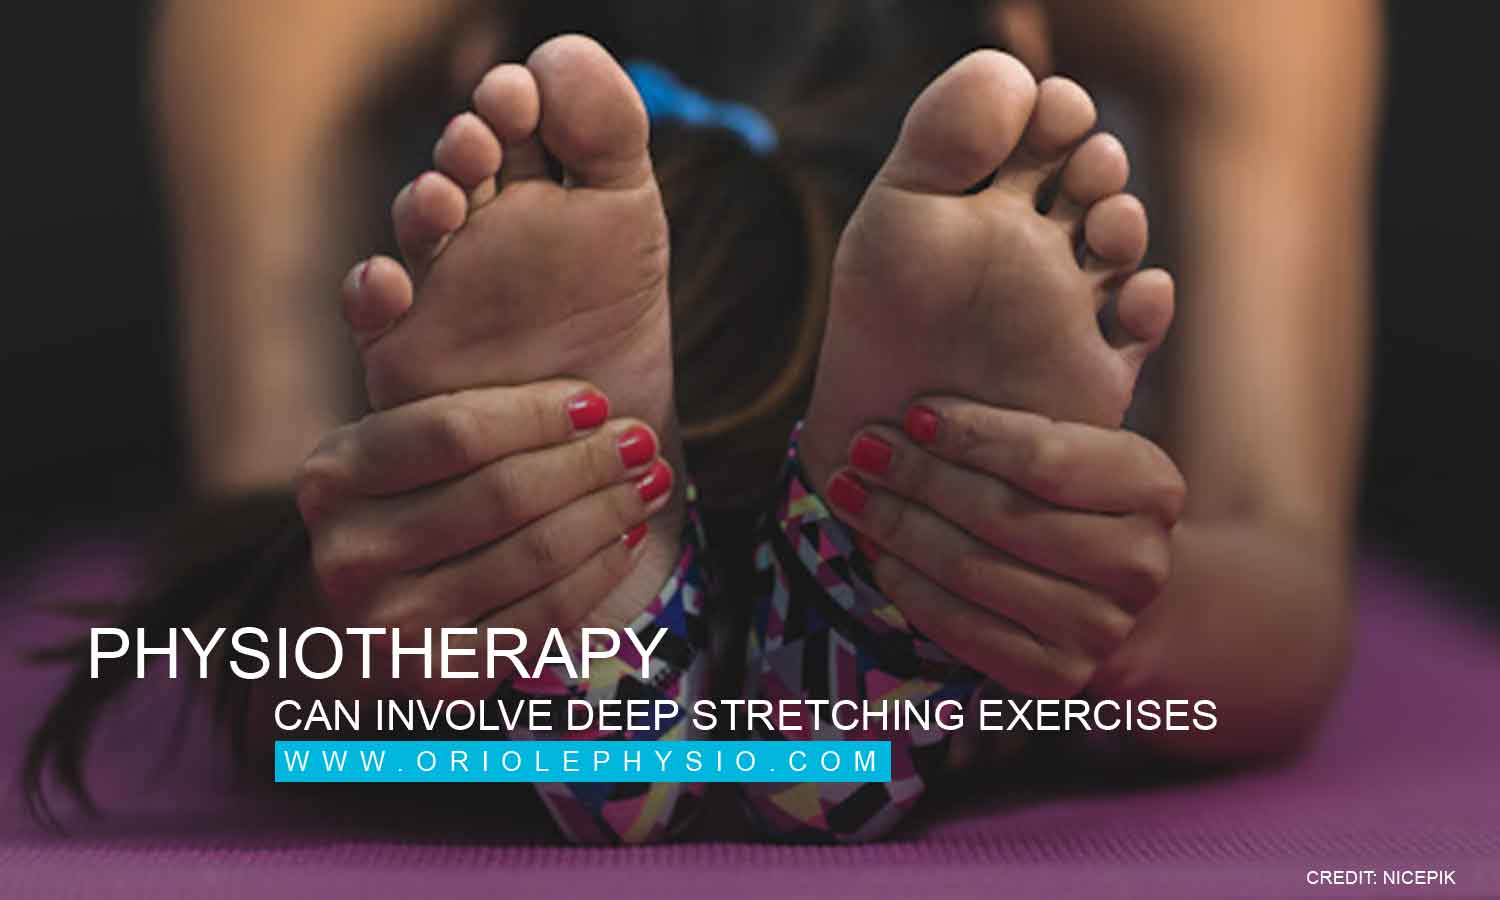 Physiotherapy can involve deep stretching exercises